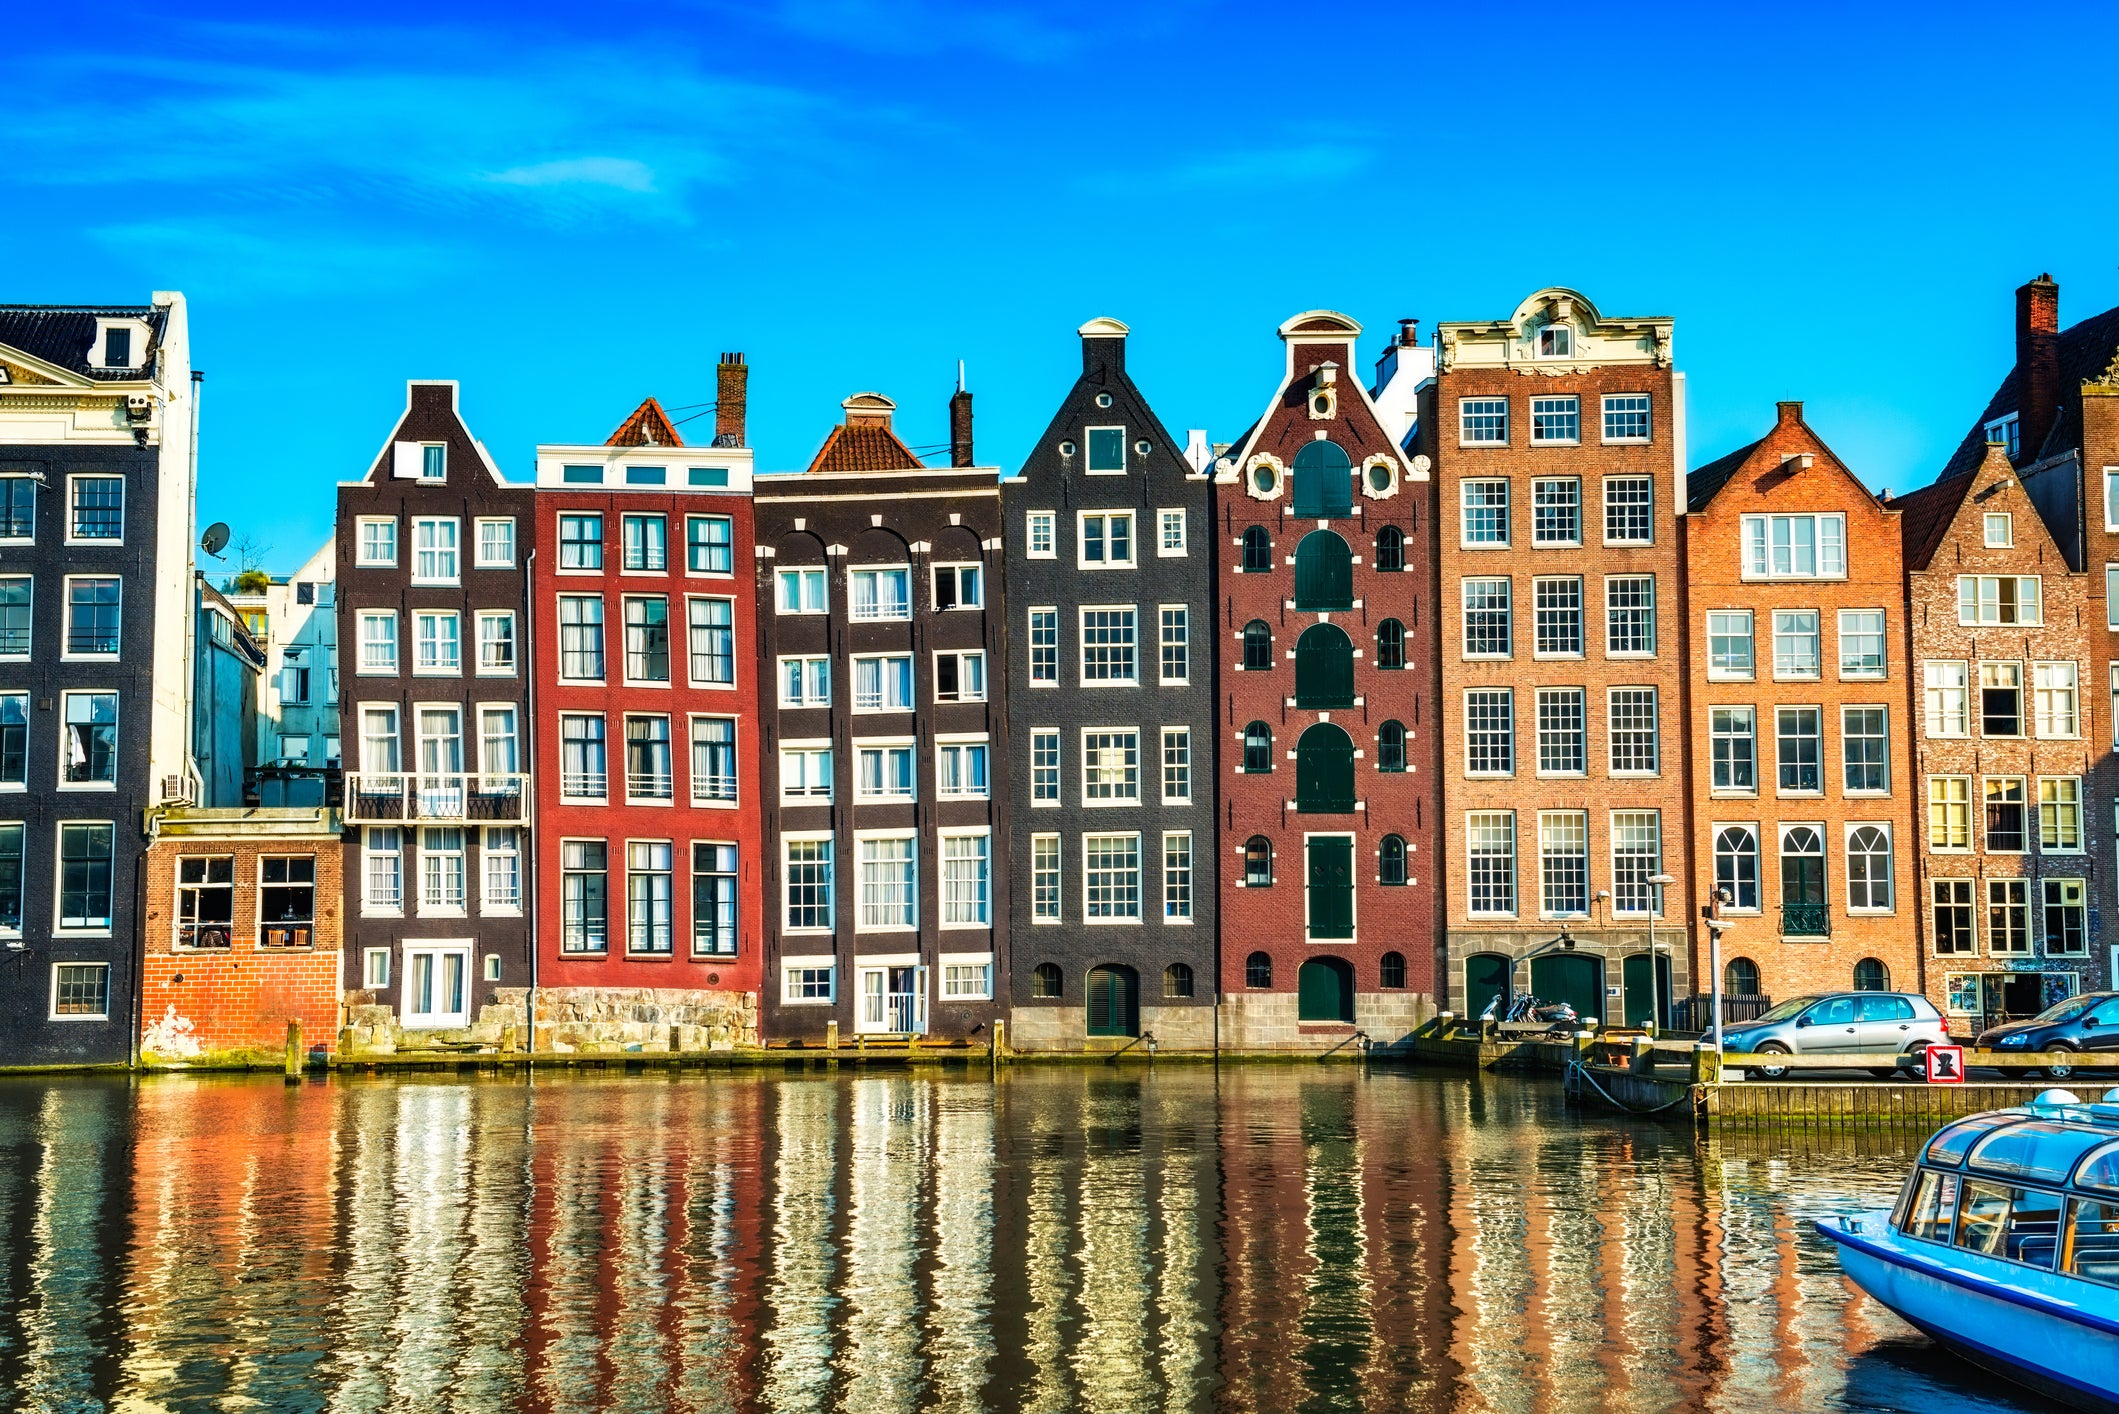 Historic houses on the canal in Amsterdam